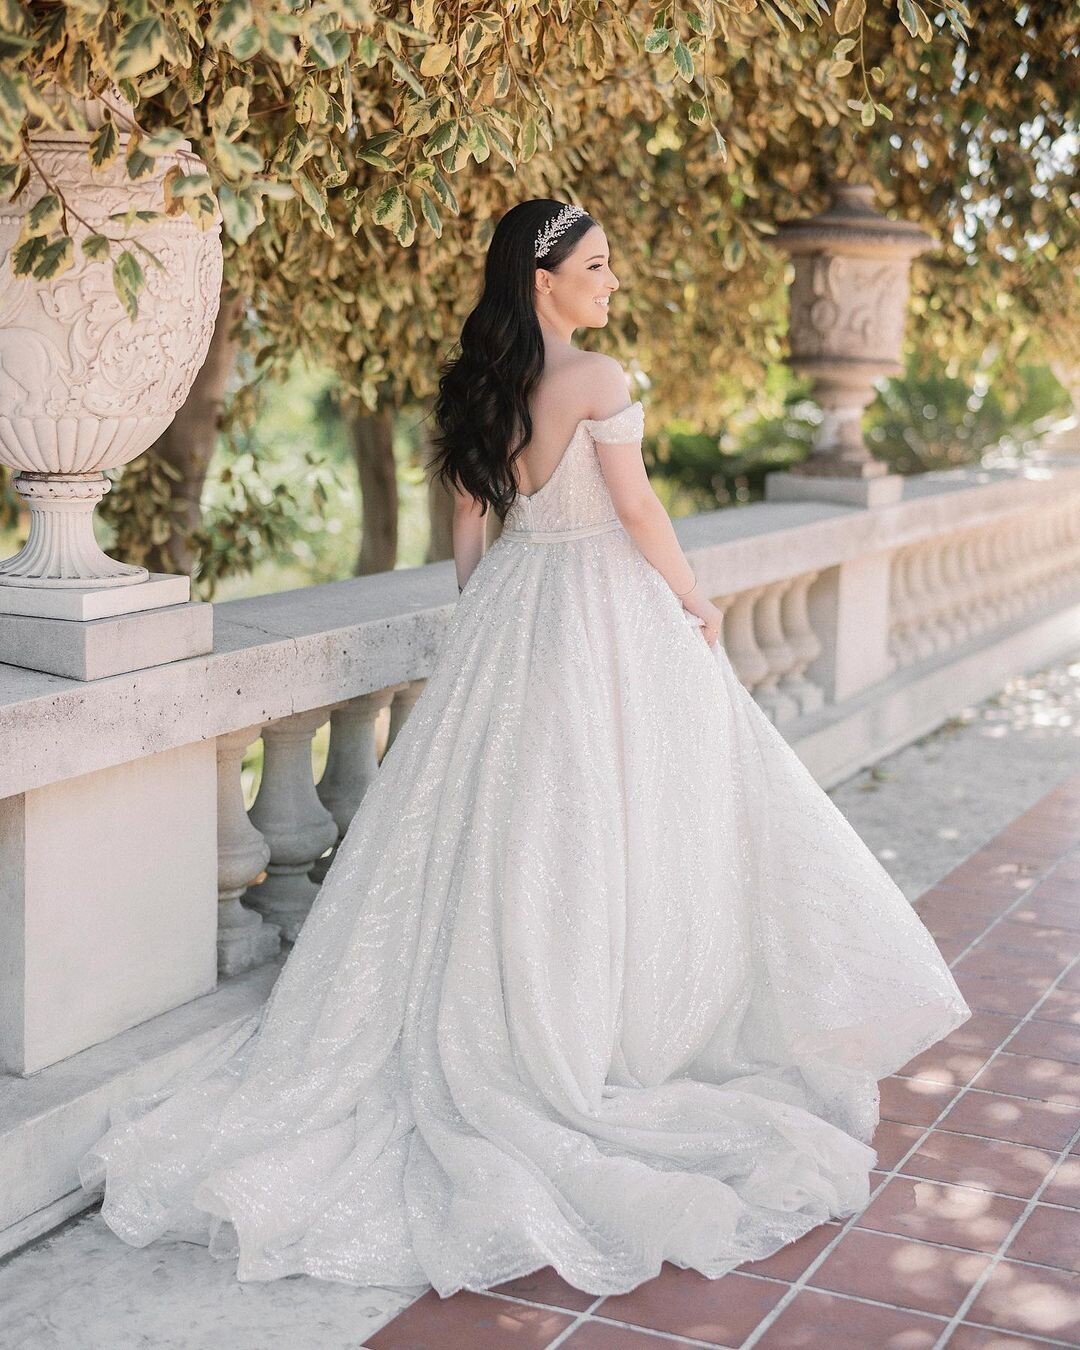 Radiant beauty and a glow that can't be denied. The bride is glowing in her Mayana Bridals dress. ✨ Find &ldquo;The One&quot; at MayanaBridals.com

Captured by: @renezadoriphotography

Appointments: MayanaBridals.com/Contact

info@mayanabridals.com
(